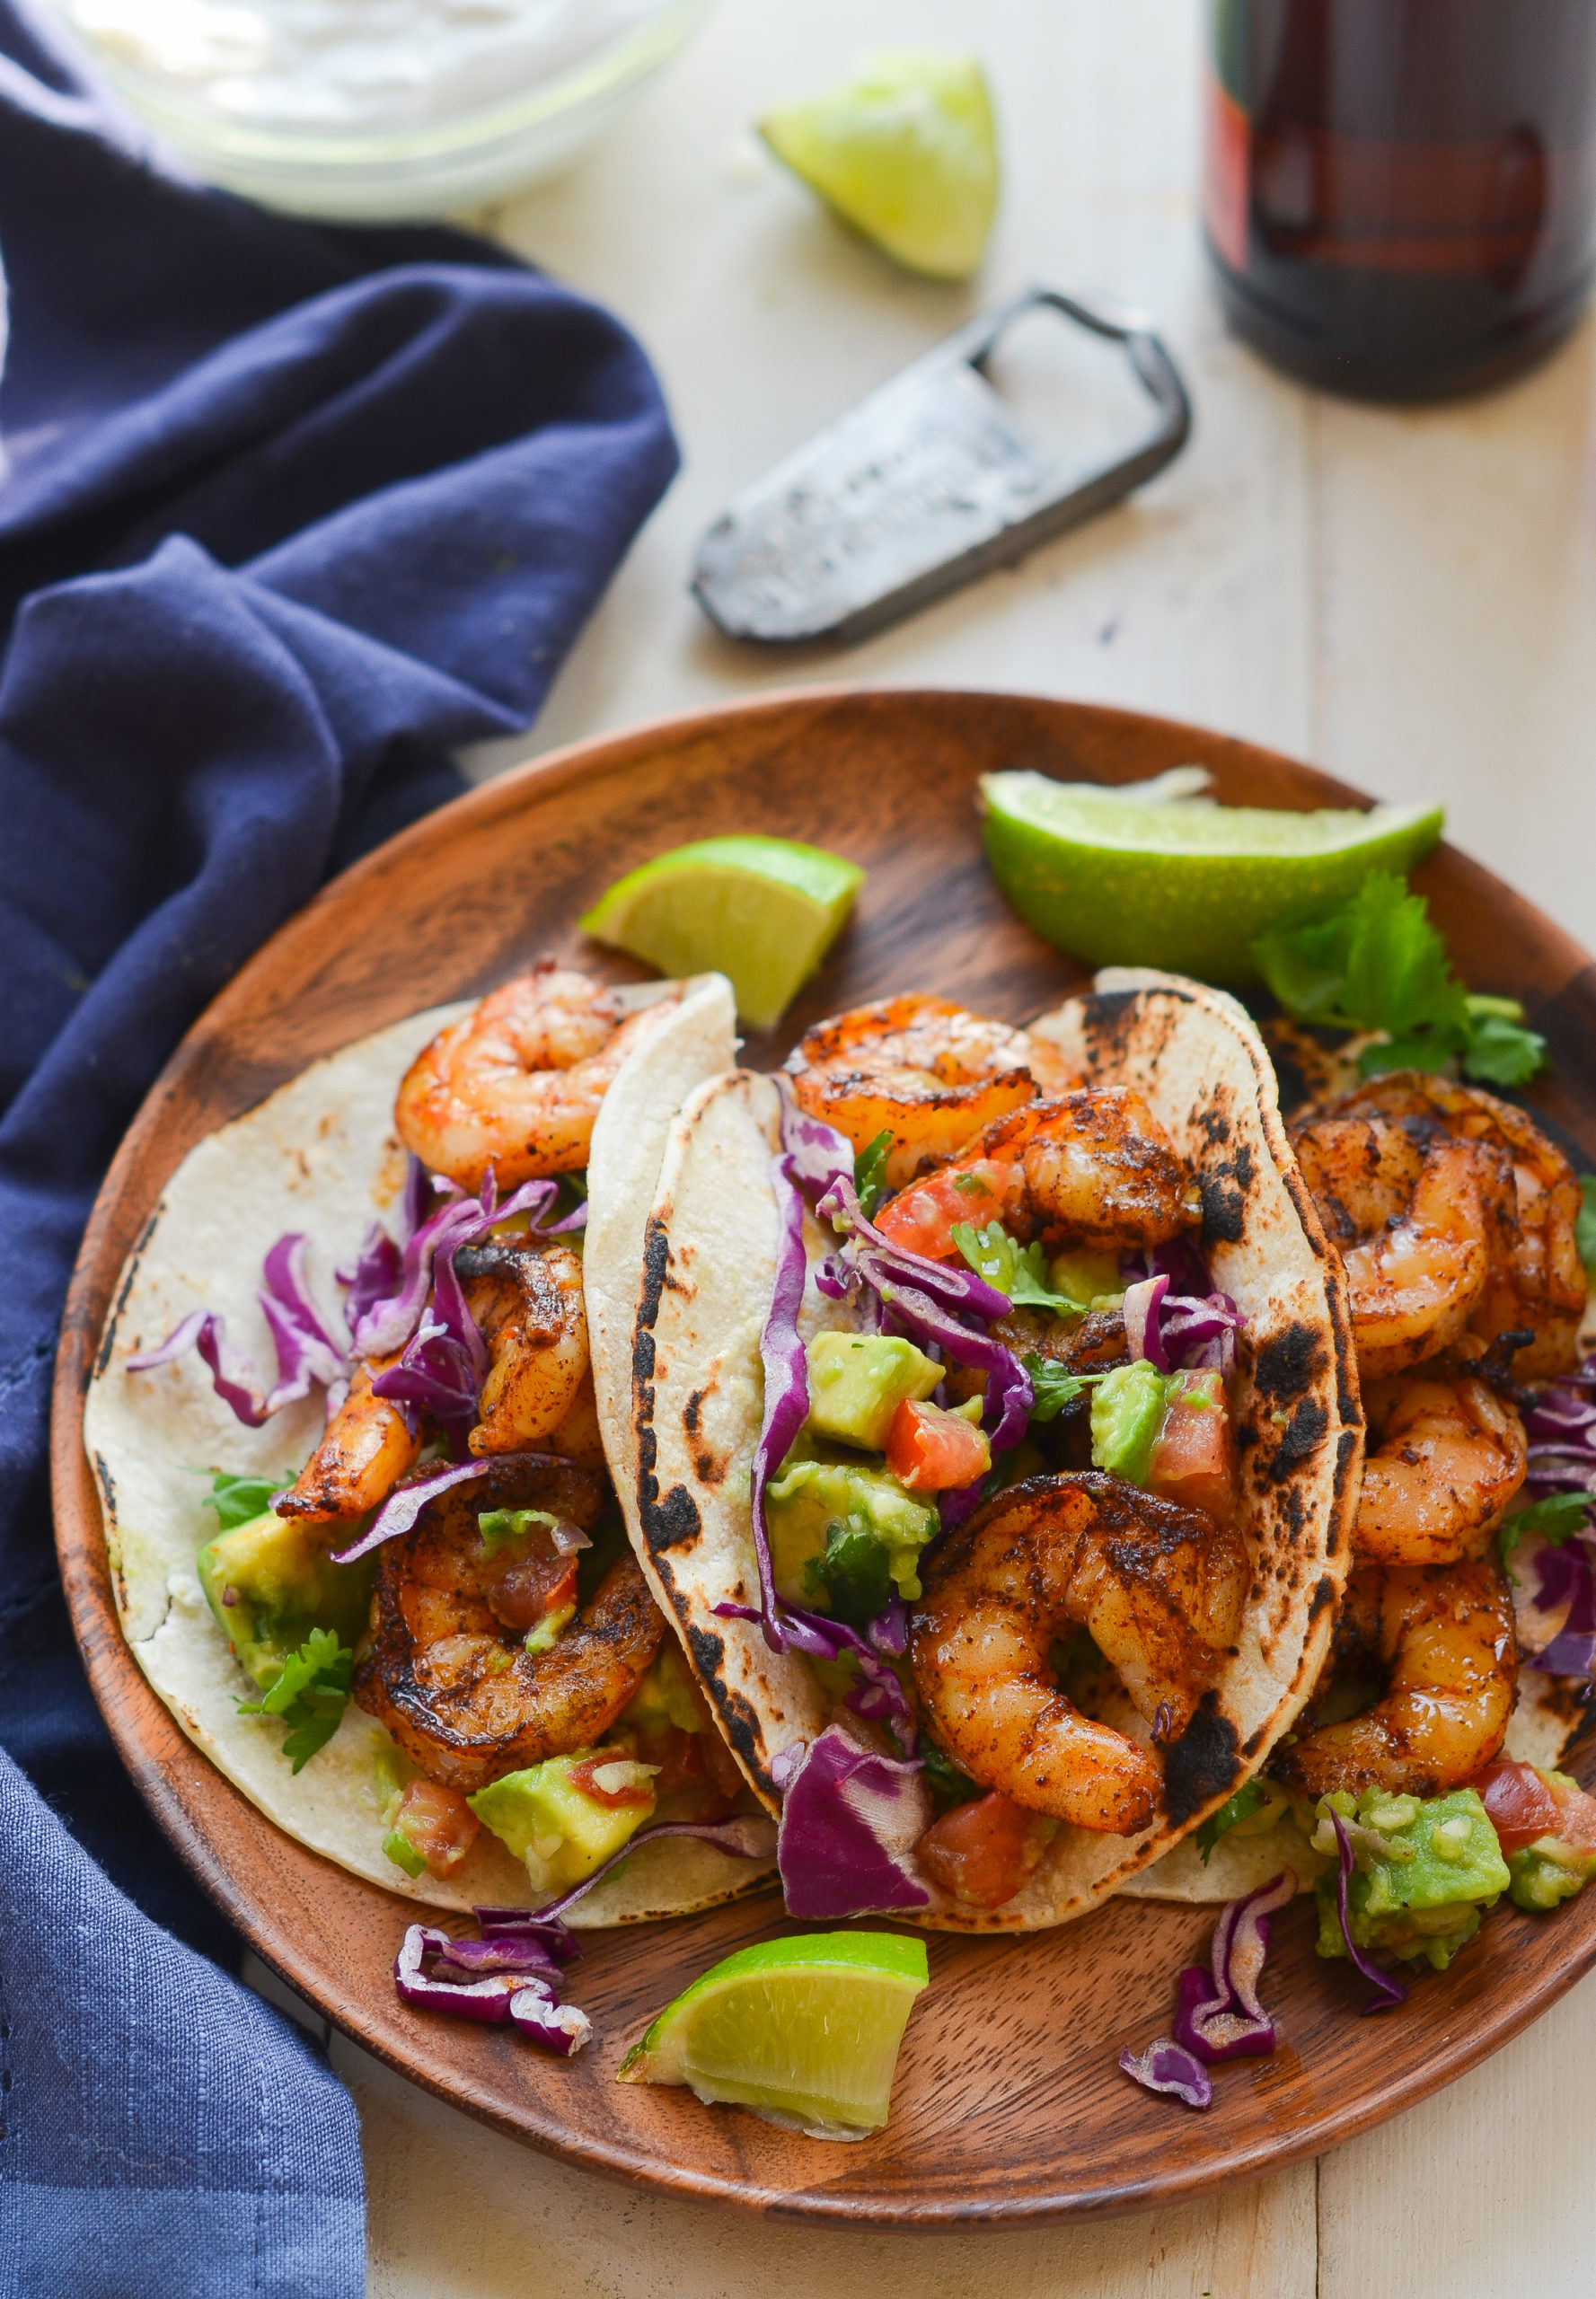 Grilled Shrimp Tacos With Avocado Salsa Once Upon A Chef,Substitute For Cornstarch In Cookies